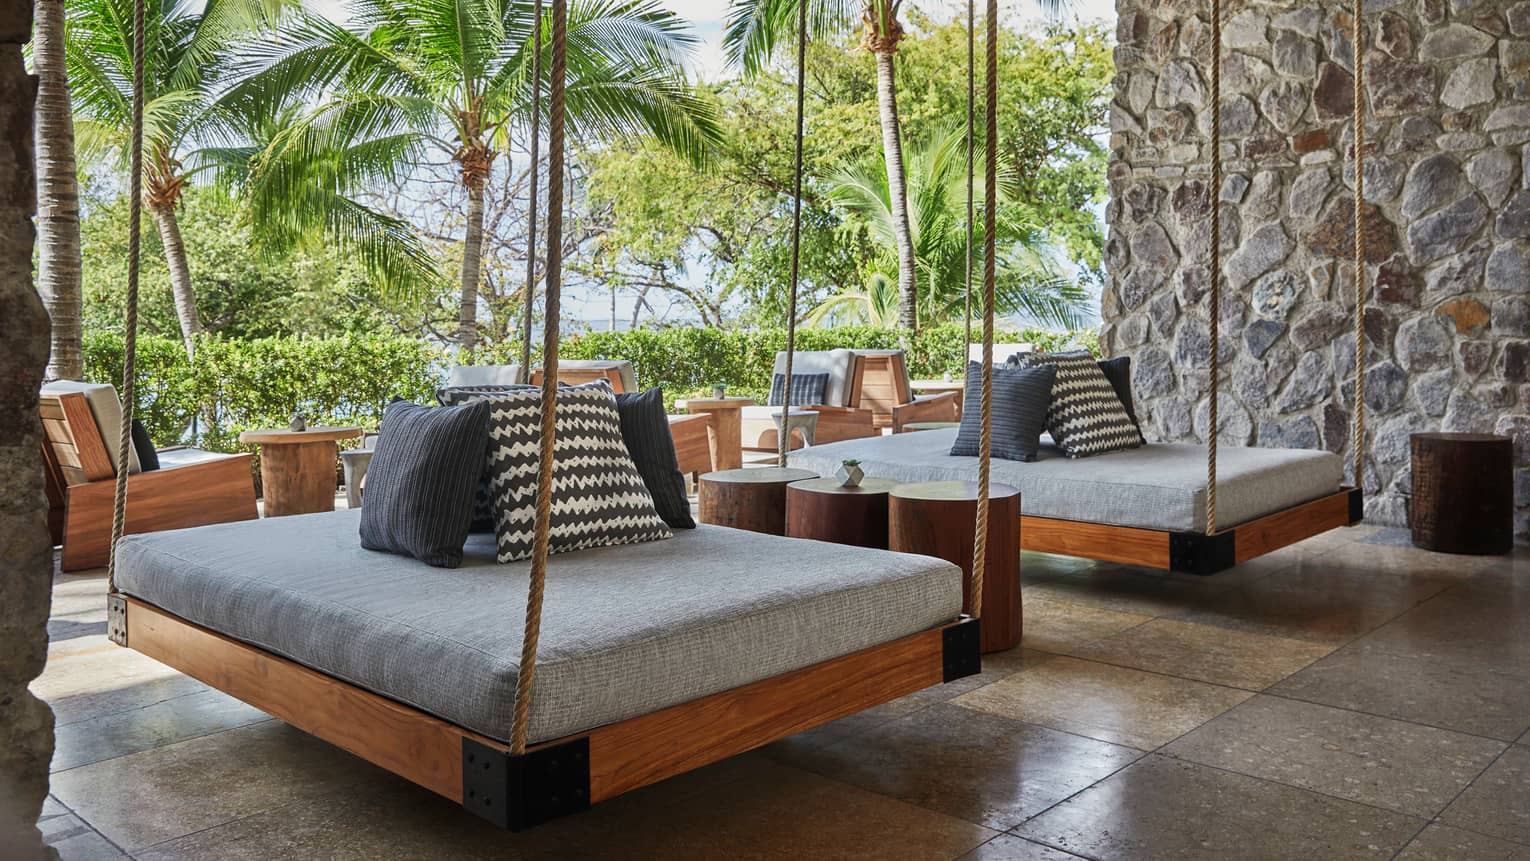 Two hanging patio beds held by ropes with thick grey cushions, accent pillows